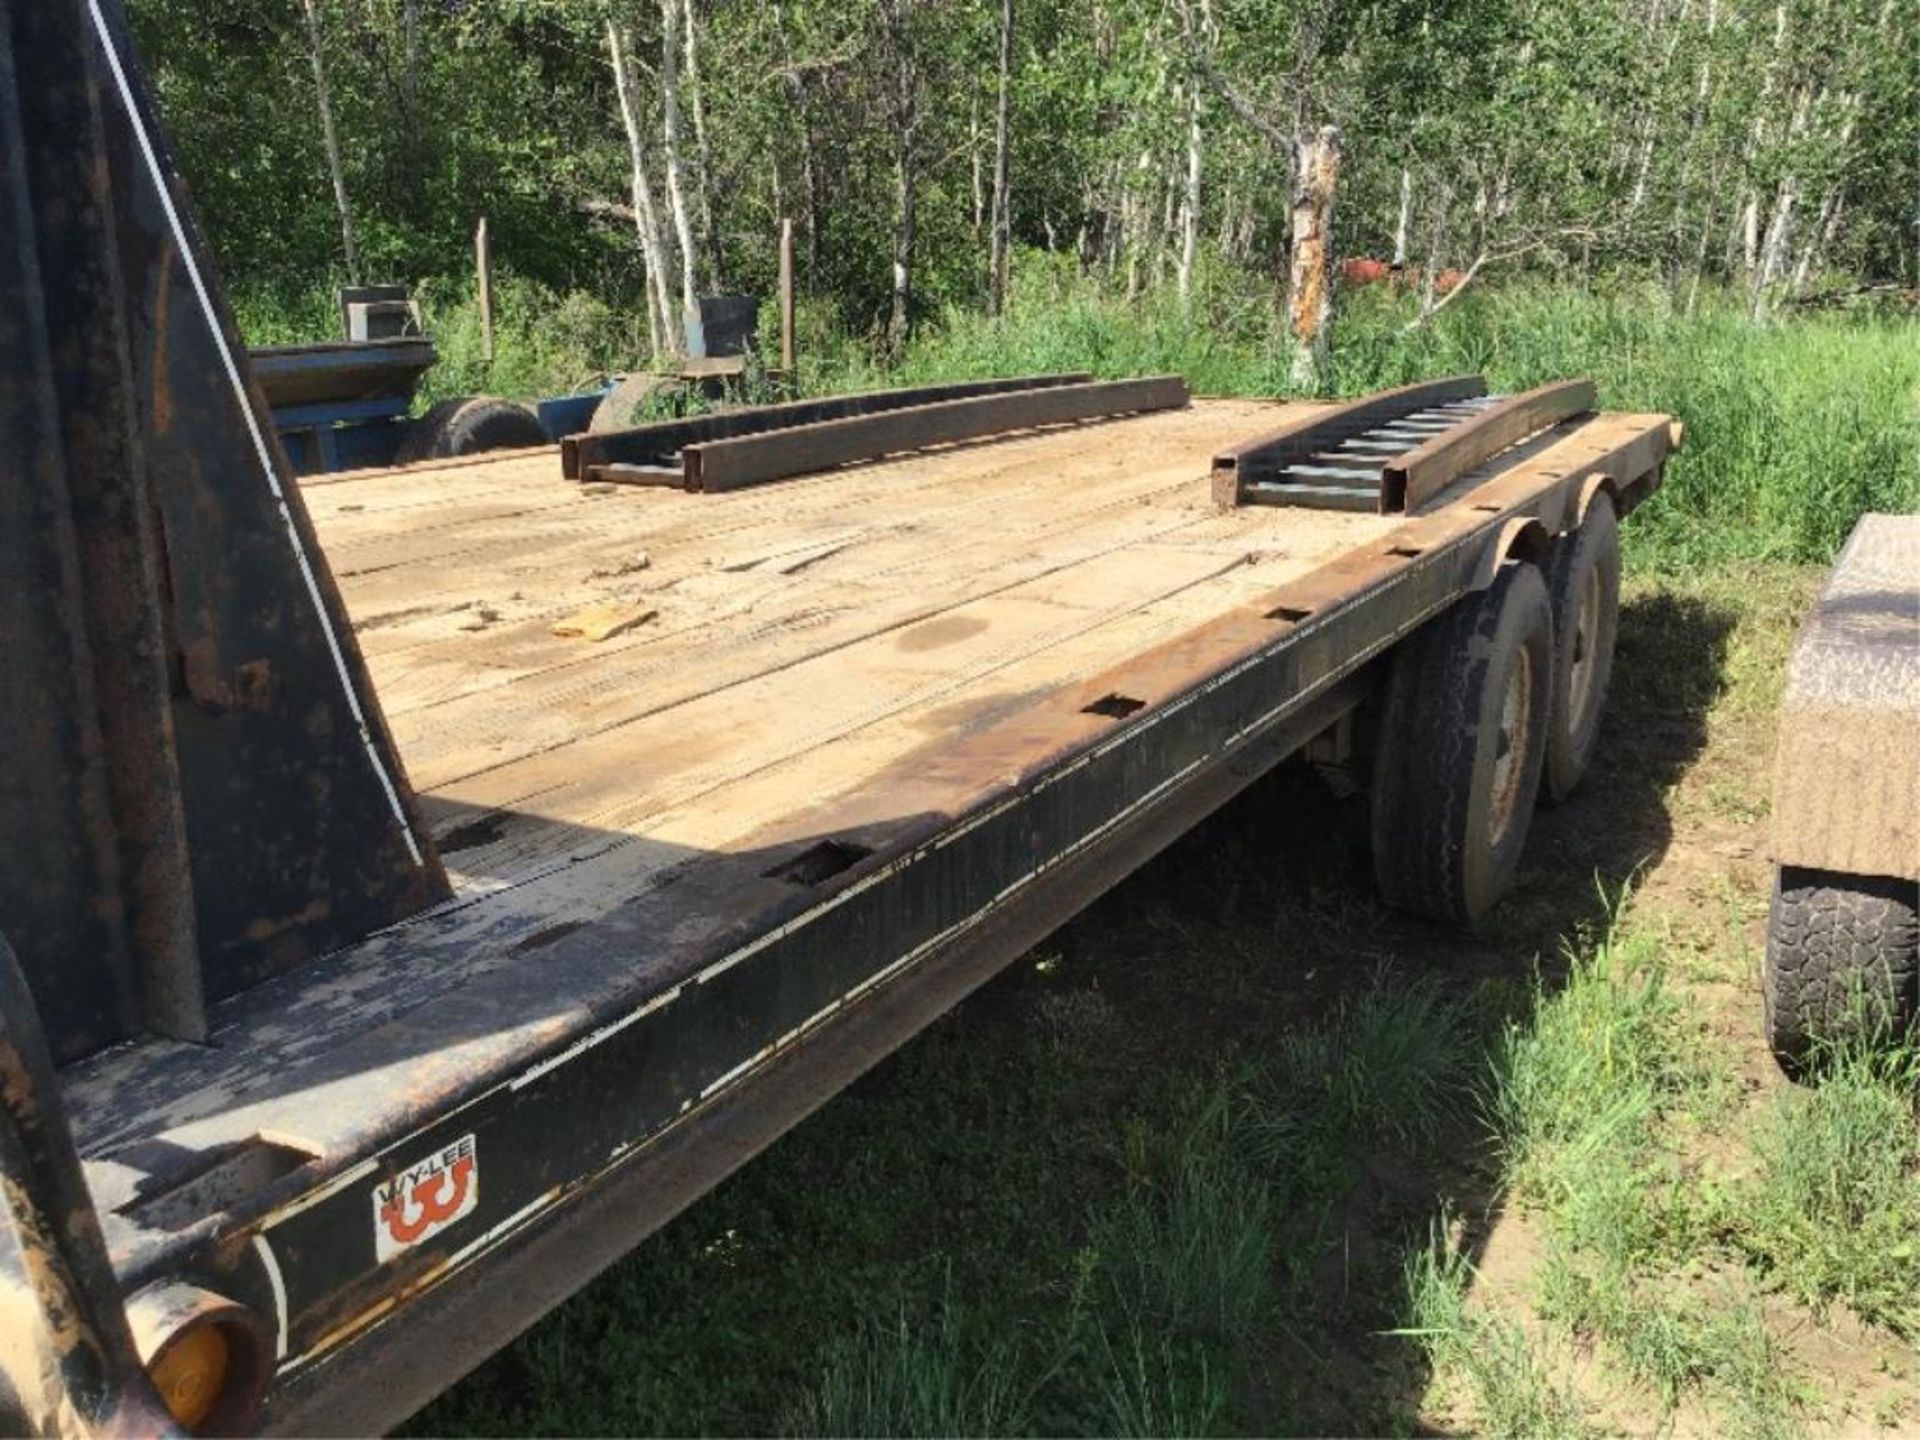 1985 Wy-Lee 18ft T/A Gooseneck Hitch Deck Trailer VIN 2W9FG18F371005004 7000lb Axles, Loading Ramps. - Image 6 of 6